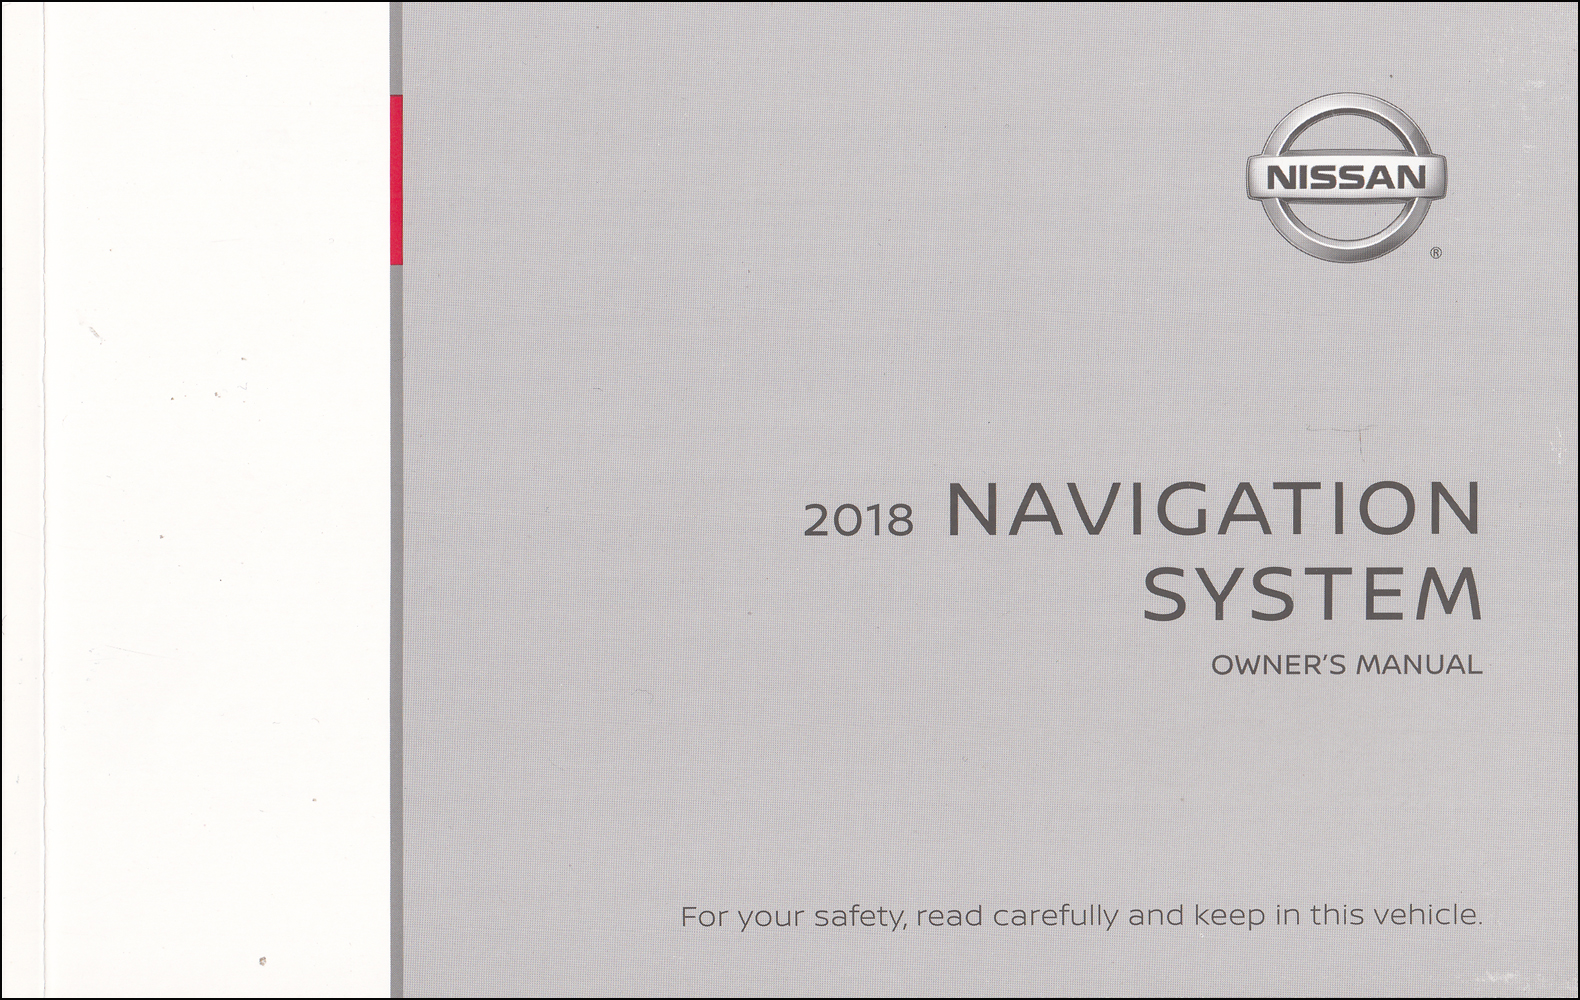 2018 Nissan L2K Navigation System Owners Manual Versa, Versa Note, and NV200